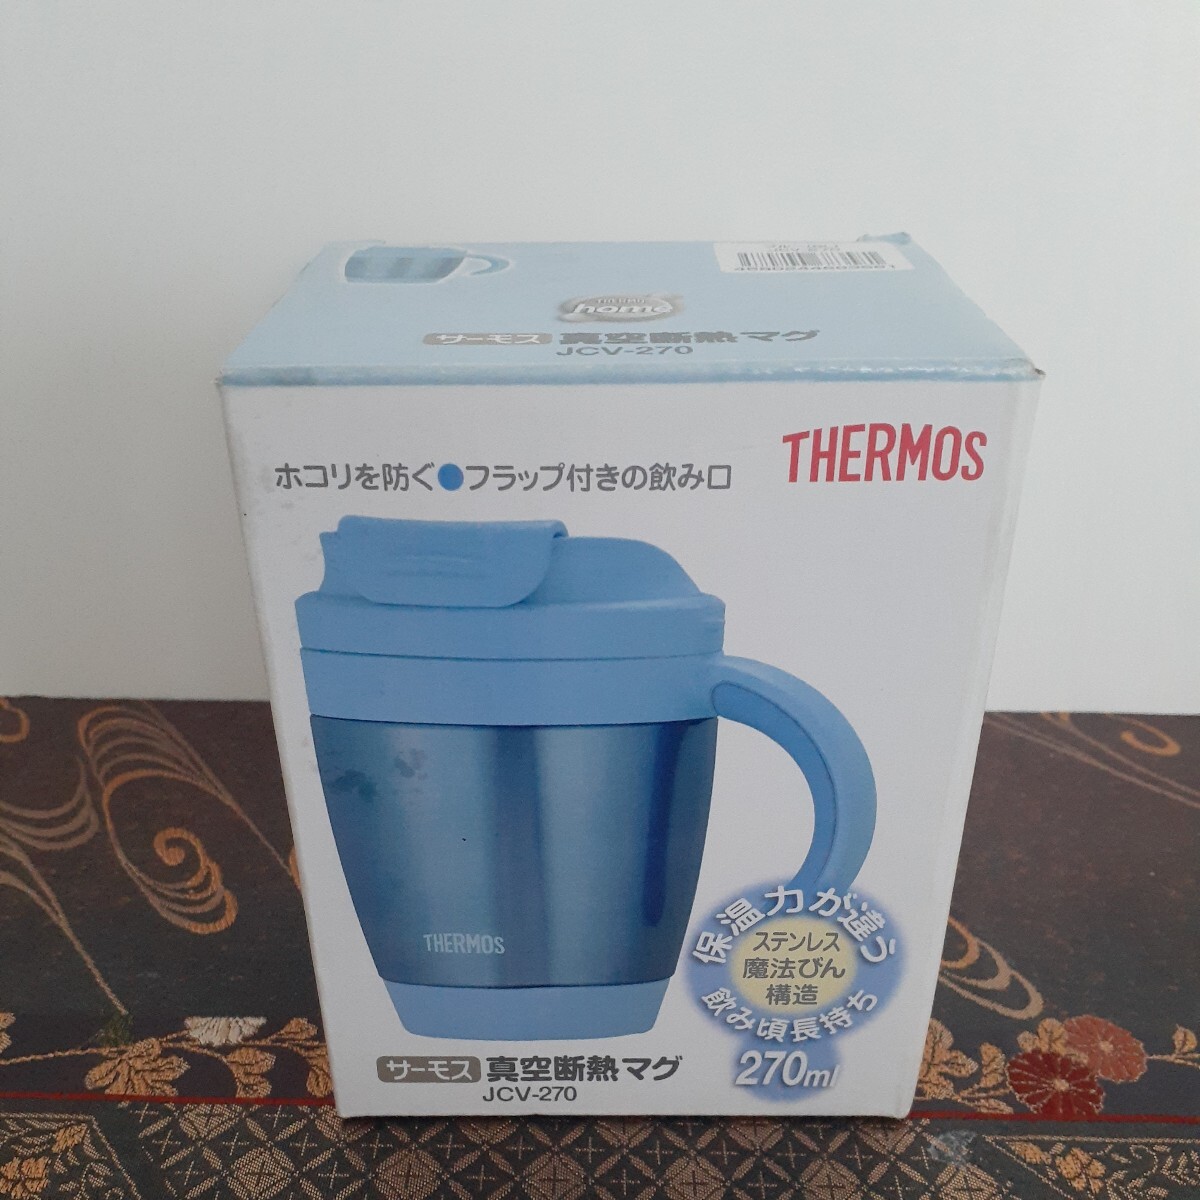  Thermos vacuum insulation mug THERMOS stainless steel magic bin structure 270ml